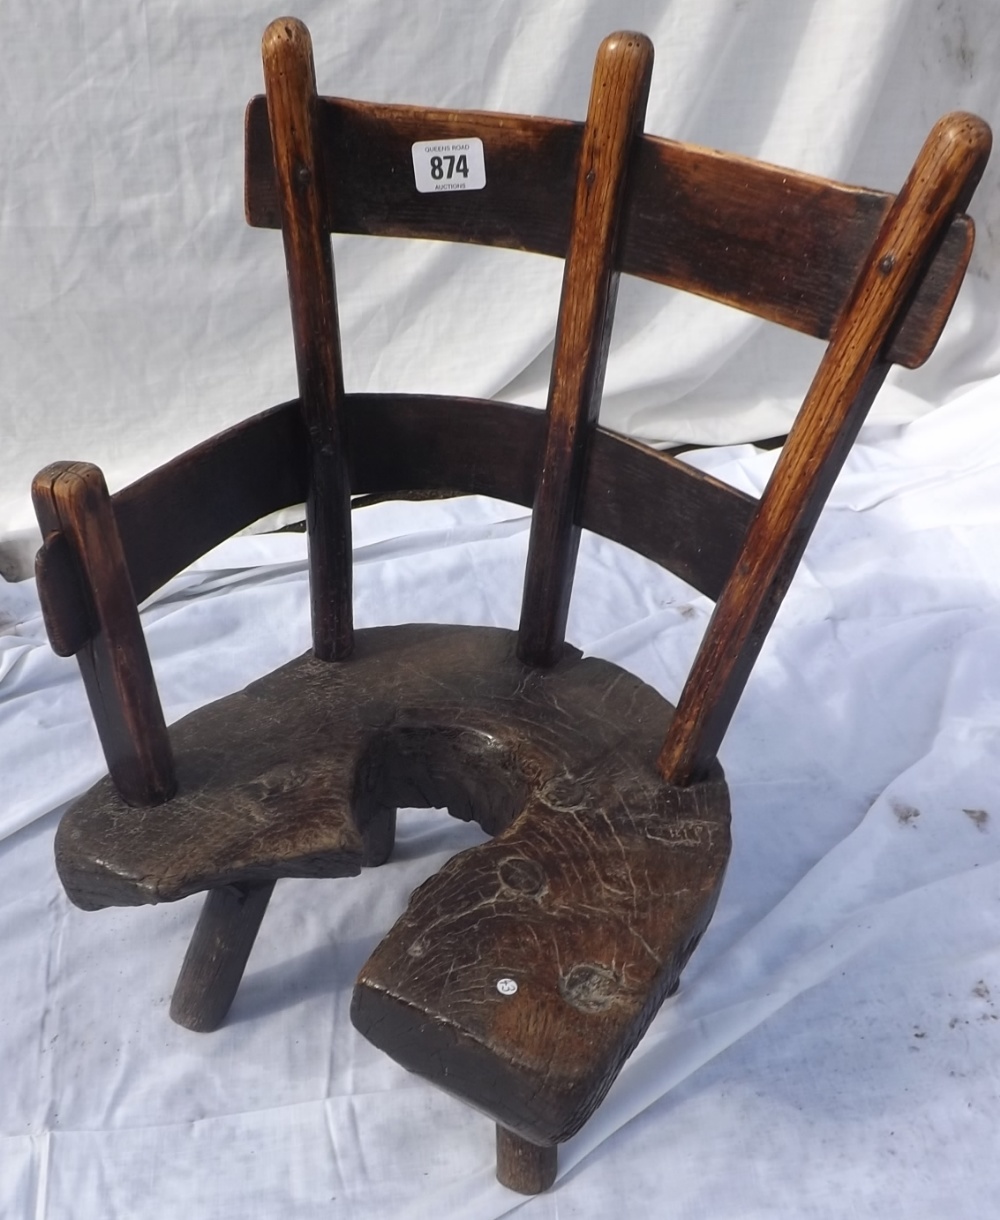 Antique primitive child's chair with oak seat - 18" high